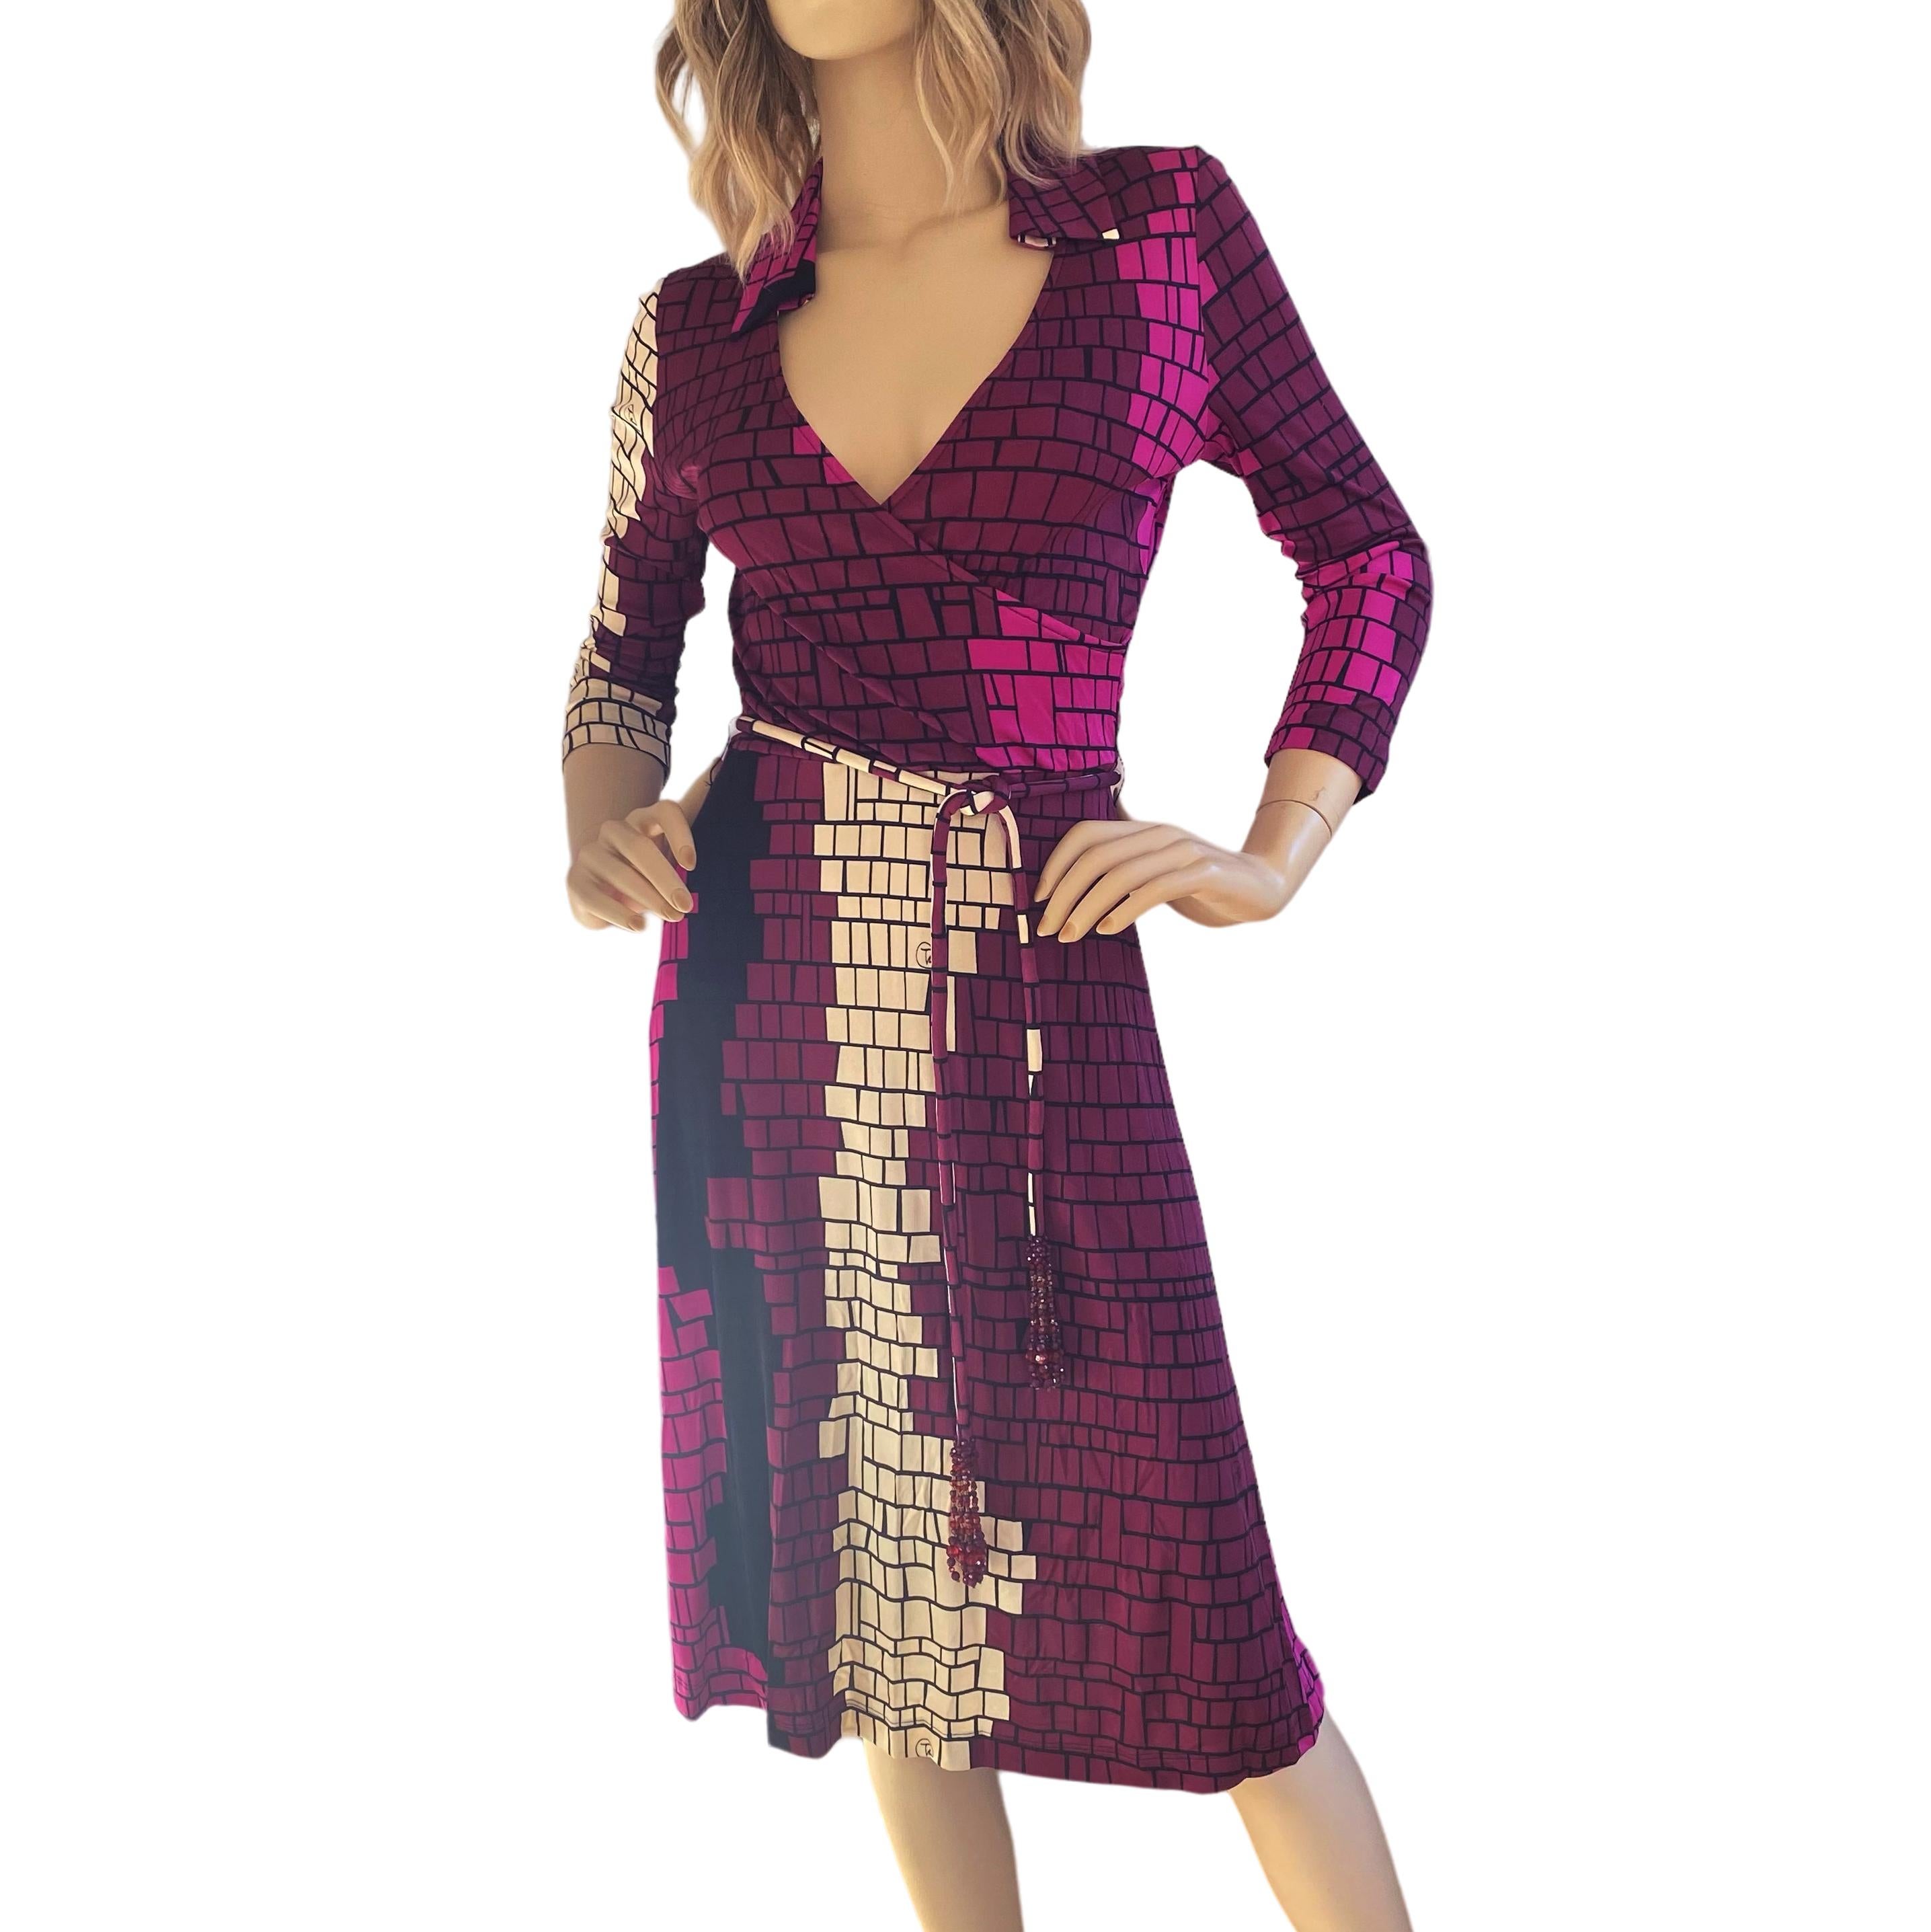 100% long-filament buttery silk jersey mock wrap dress. In original, signed 'Mosaic' print in cream, pink, burgundy, and black colors. 
Removable tasseled silk cord belt - use your own belt for a more daytime look.  
Pointed shirt collar. 3/4